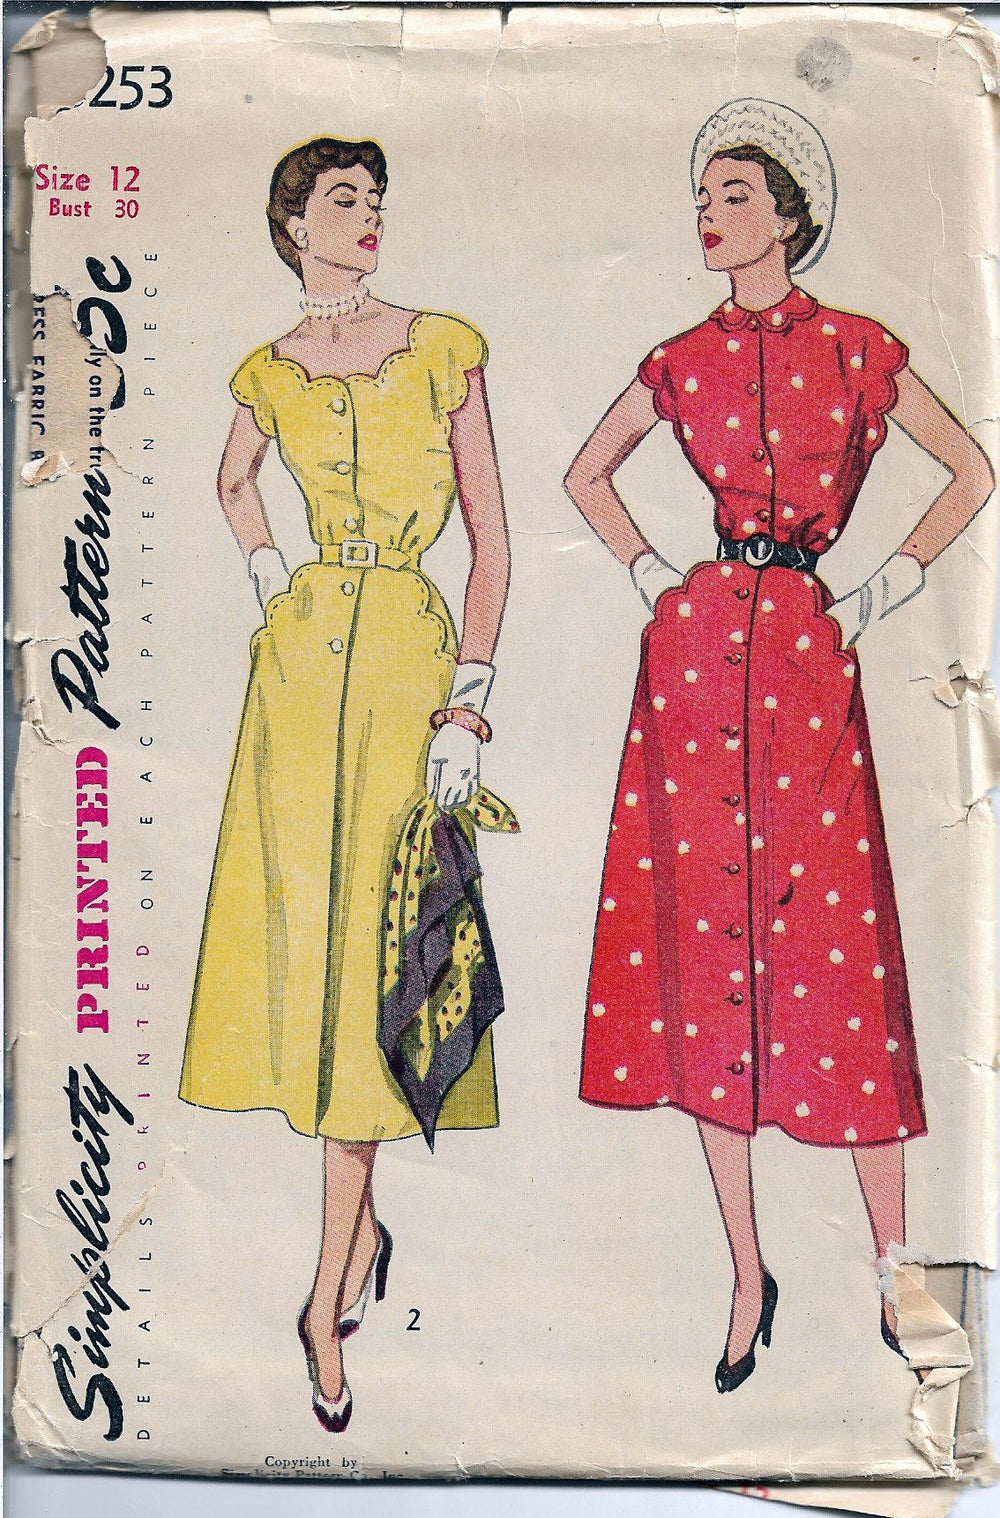 Simplicity 3253 Ladies Scalloped Buttoned Dress Vintage Sewing Pattern 1950s - VintageStitching - Vintage Sewing Patterns